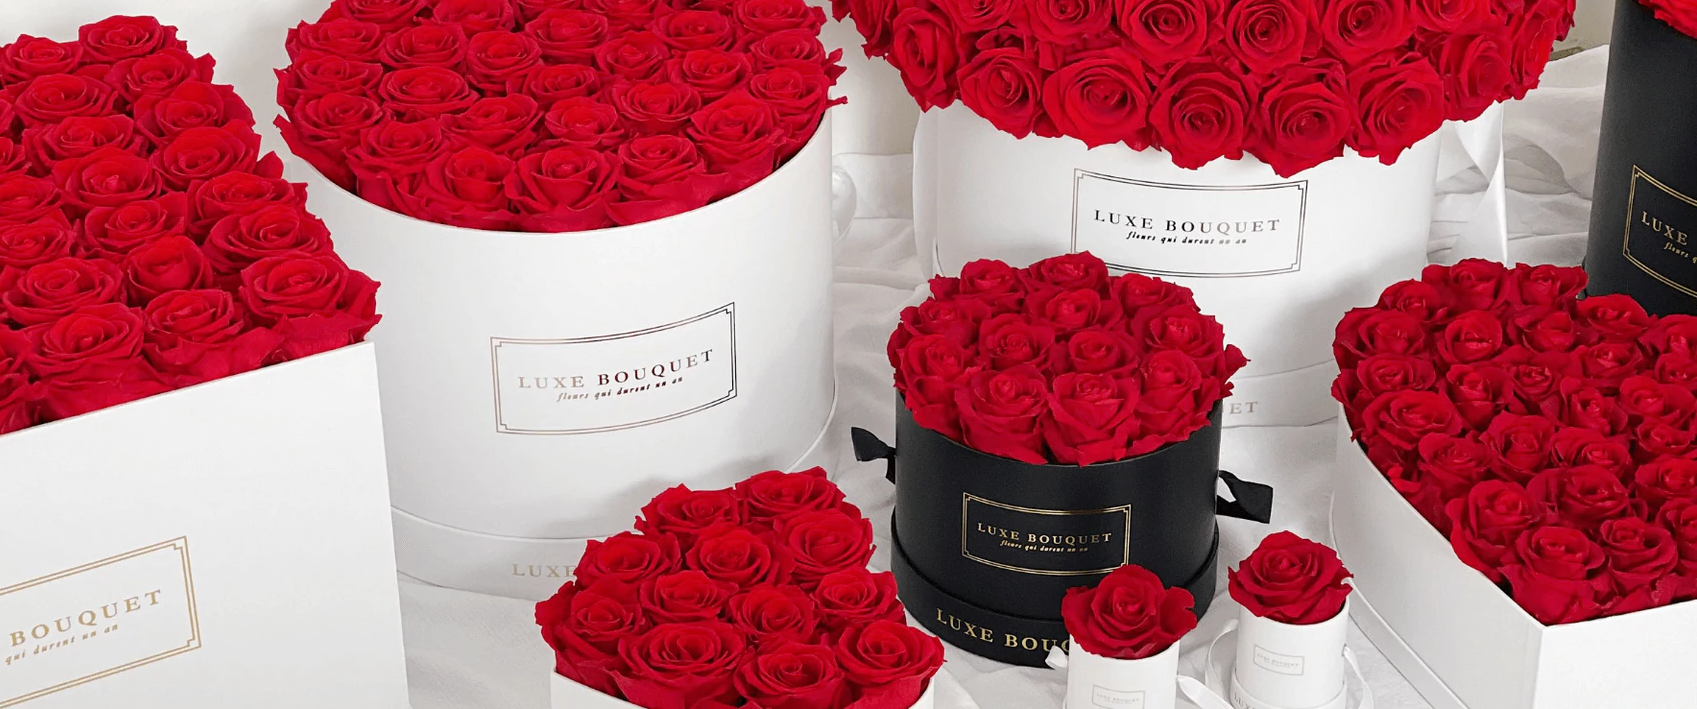 All Luxe Bouquet Deals & Promotions